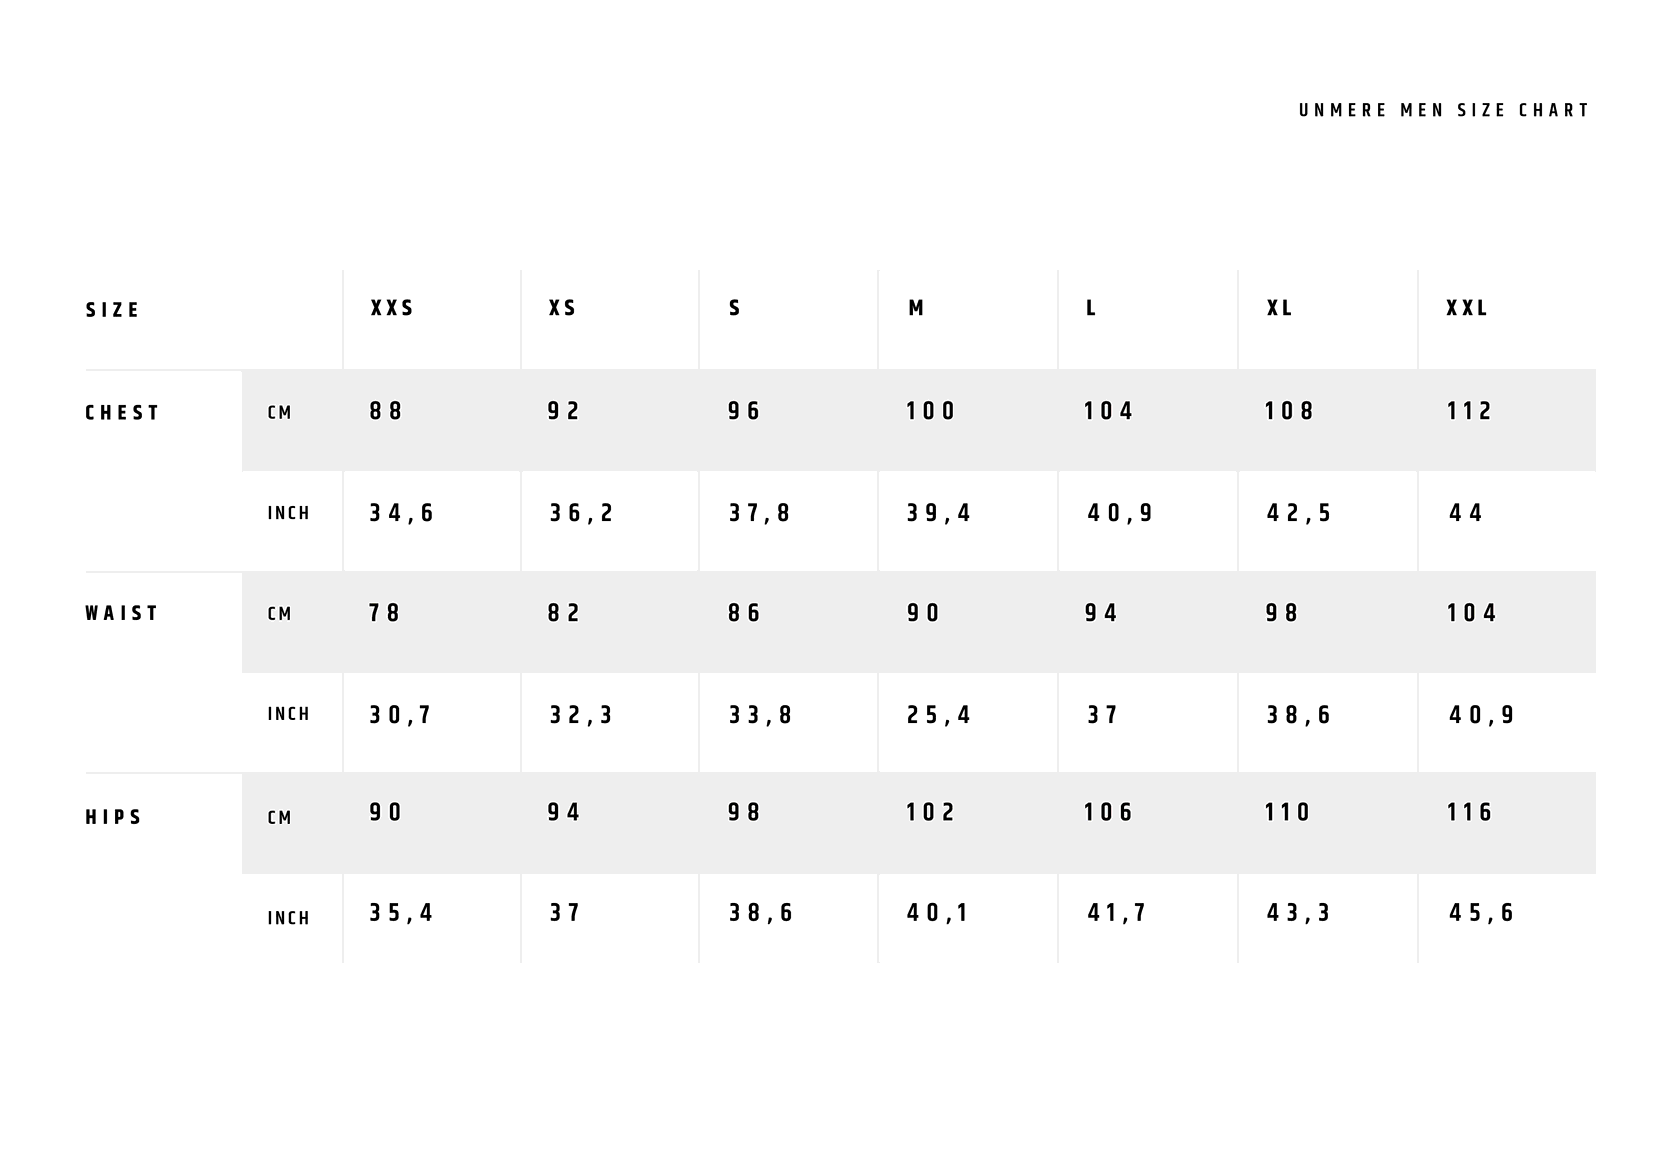 Contact Size Chart